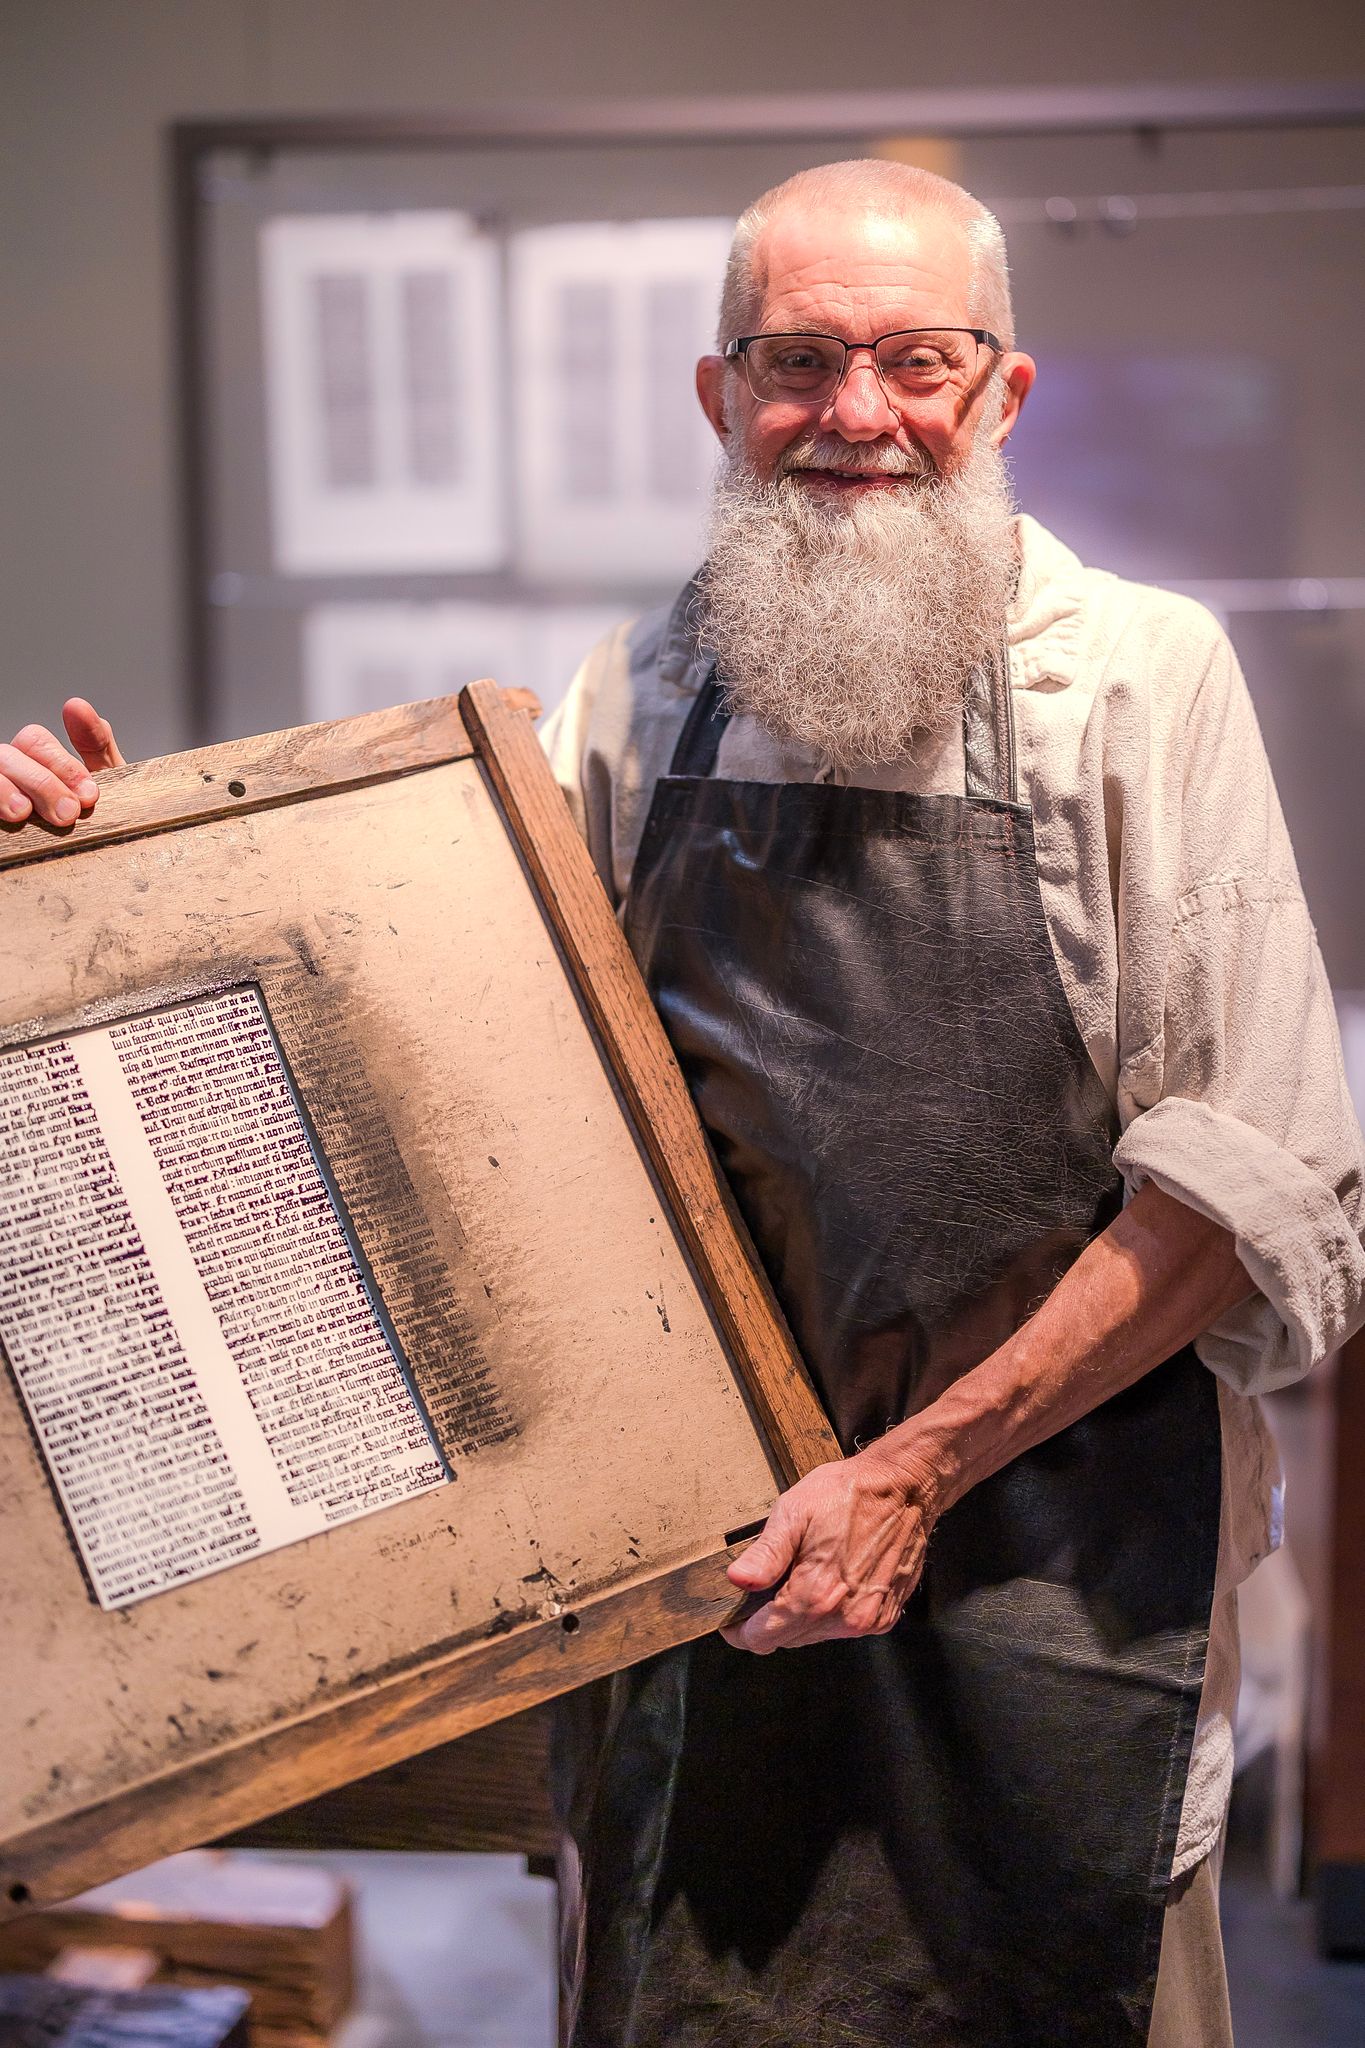 A demonstrator of The Gutenberg Press shows off his work. The press is on exhibit at the Museum of the Bible in Washington, D.C.